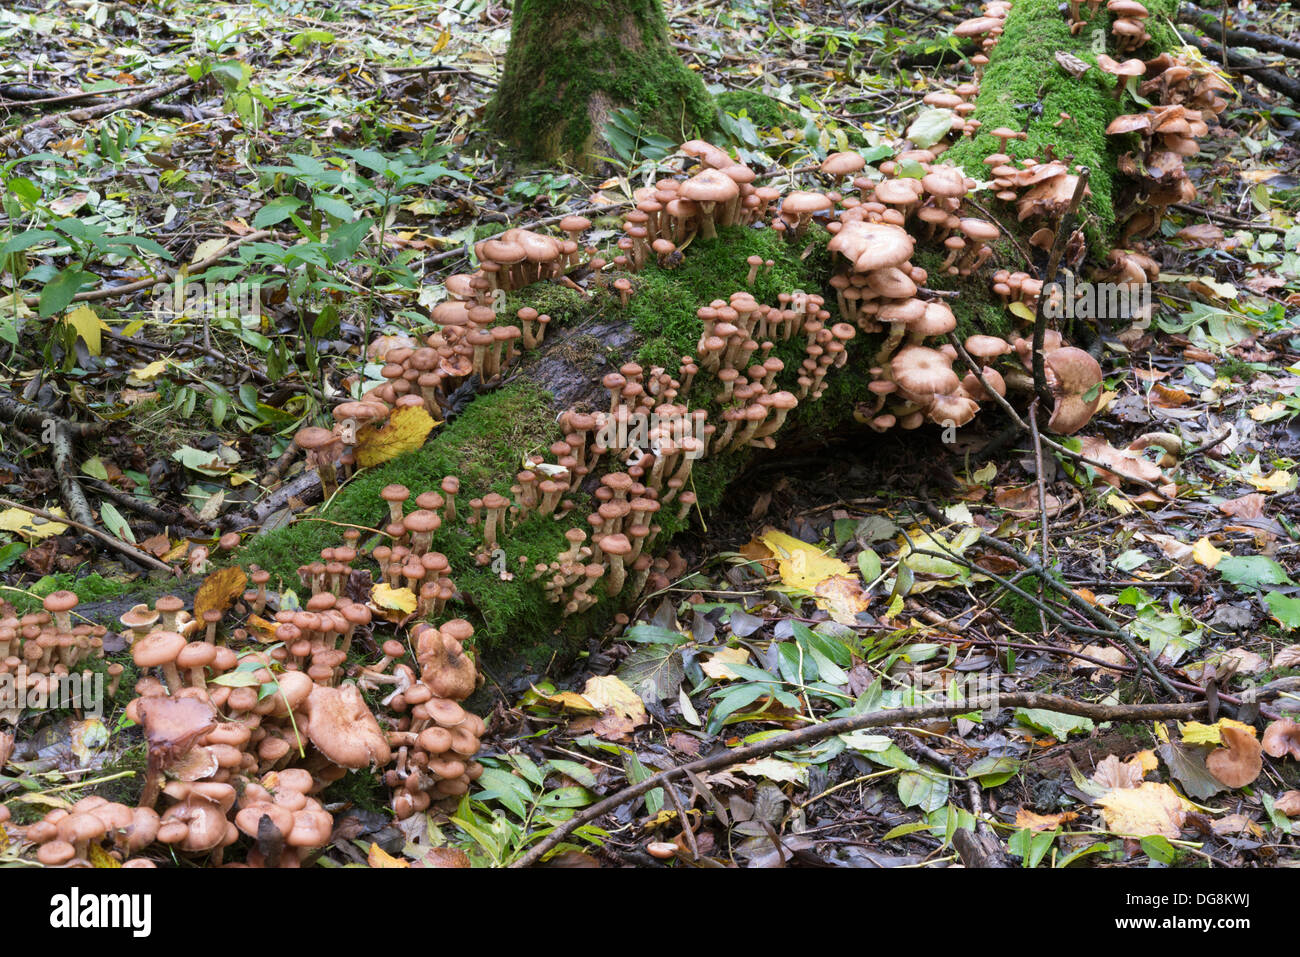 Honey fungus or Armillaria growing ina dead tree in a wood in the UK Stock Photo